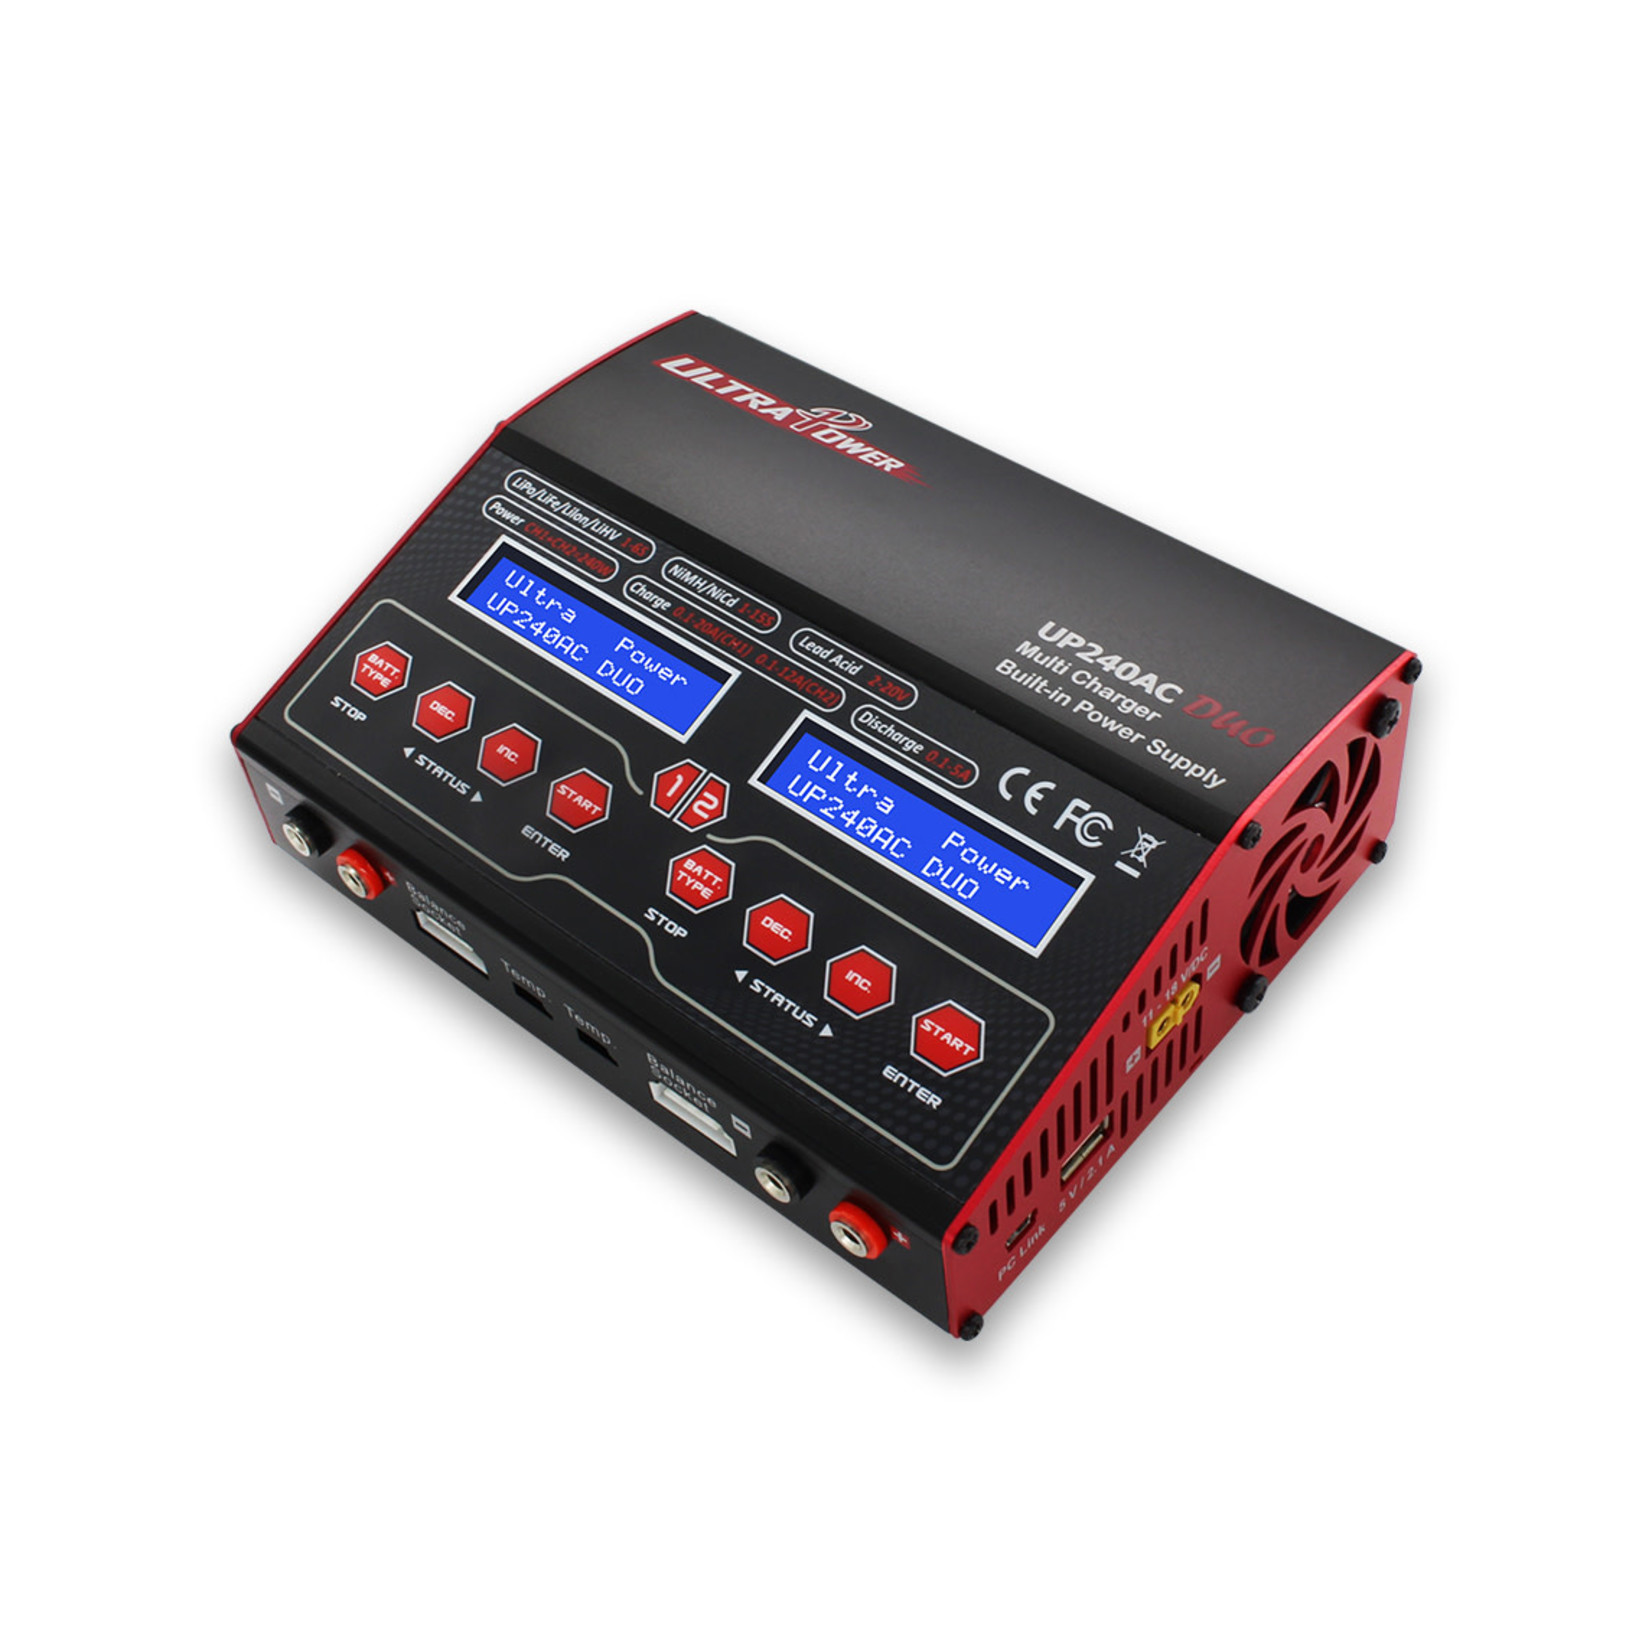 Ultra Power Ultra Power UP240 AC DUO 240 W Dual Port Multi-Chemistry AC/DC Charger #UPTUP240ACDUO